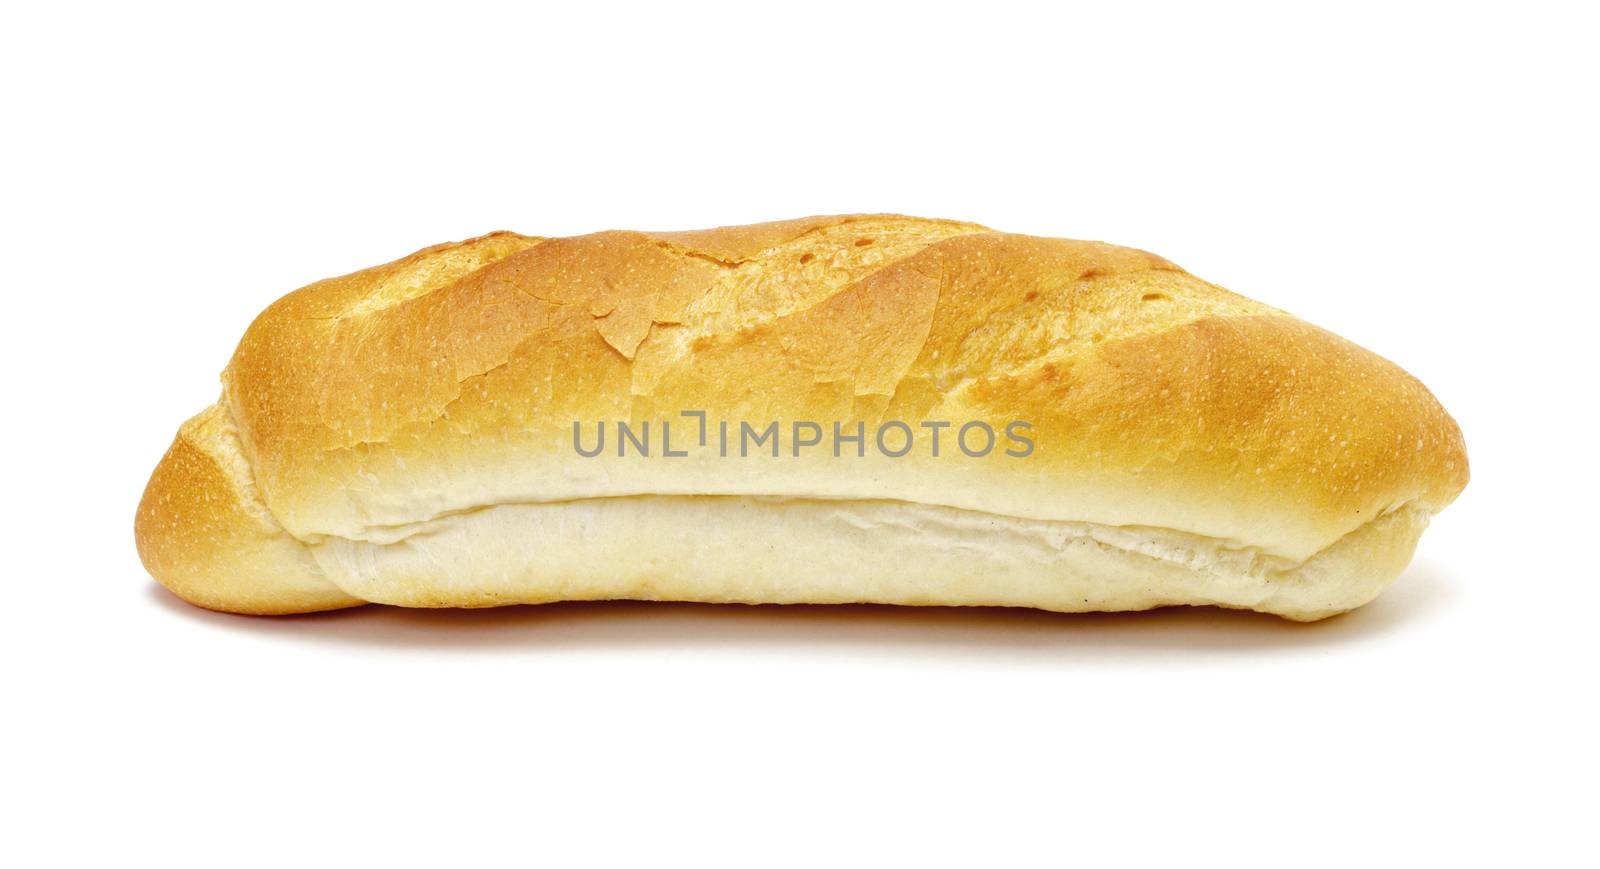 Wheat bread on white background